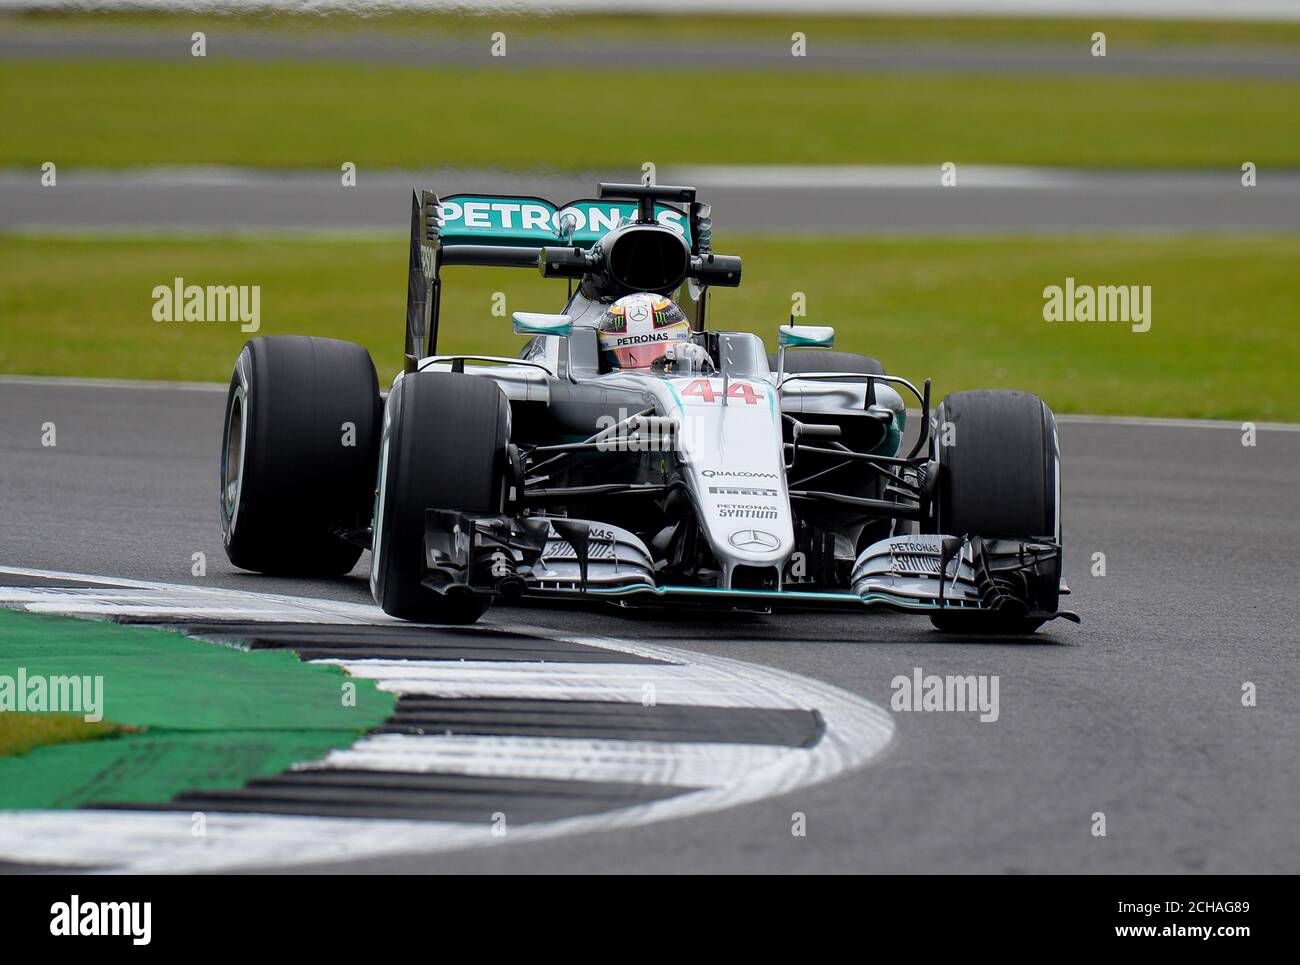 Mercedes' Lewis Hamilton during Practice Day for the 2016 British Grand Prix at Silverstone Circuit, Towcester. PRESS ASSOCIATION Photo. Picture date: Friday July 8, 2016. See PA story AUTO British. Photo credit should read: Tony Marshall/PA Wire. RESTRICTIONS: Editorial use only. Commercial use with prior consent from teams. Call +44 (0)1158 447447 for further information. Stock Photo